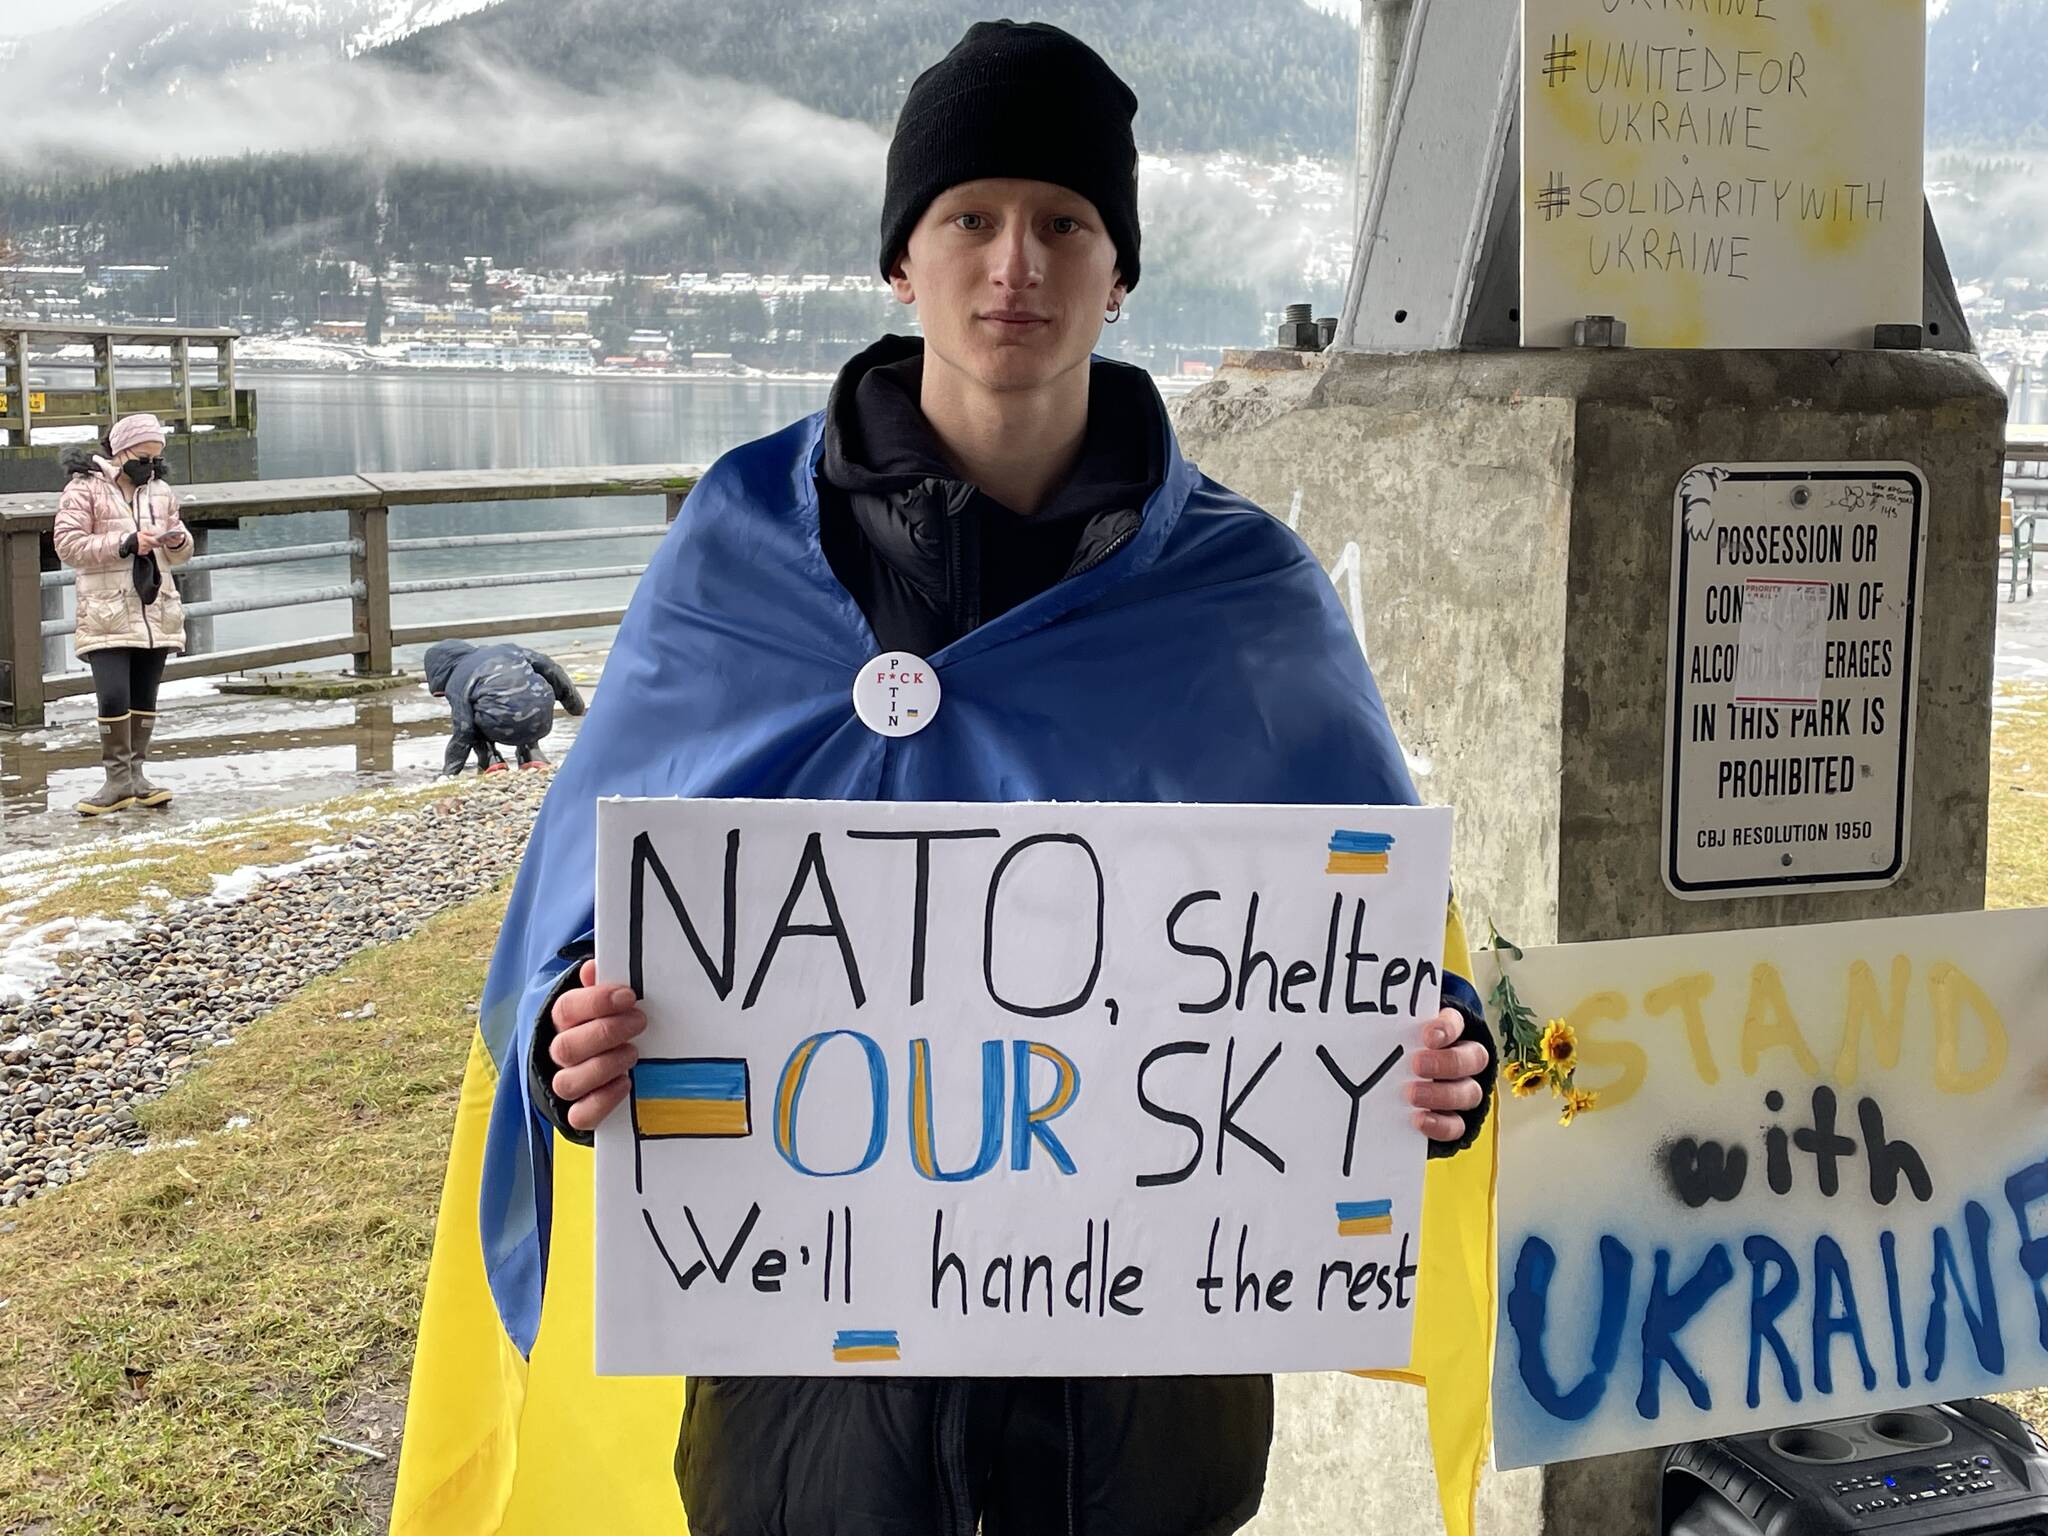 Viktor Tkachenko, who moved to Alaska from Ukraine last year, holds a sign asking NATO for assistance defeating Russian airpower at a protest against the war in Marine Park on Feb. 26, 2022. (Michael S. Lockett / Juneau Empire)